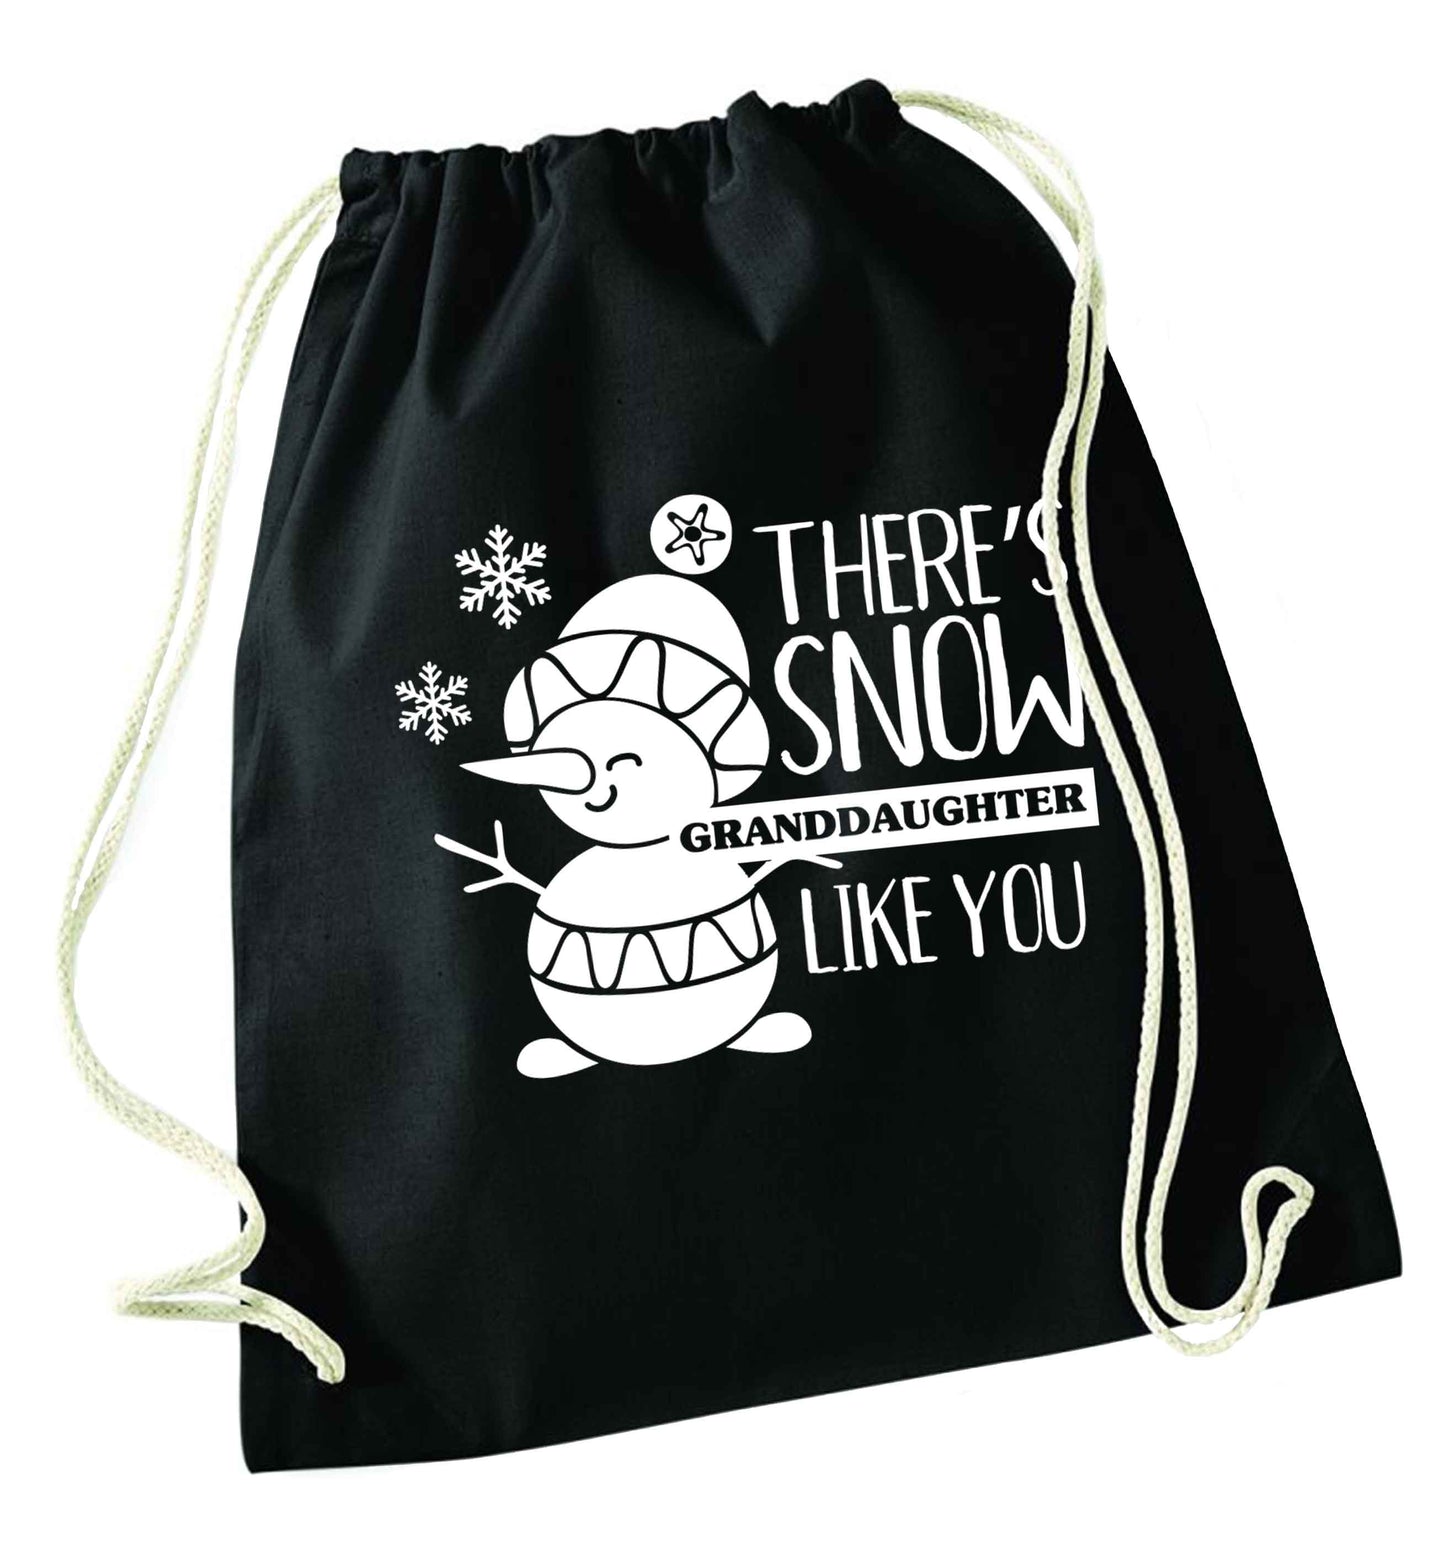 There's snow granddaughter like you black drawstring bag